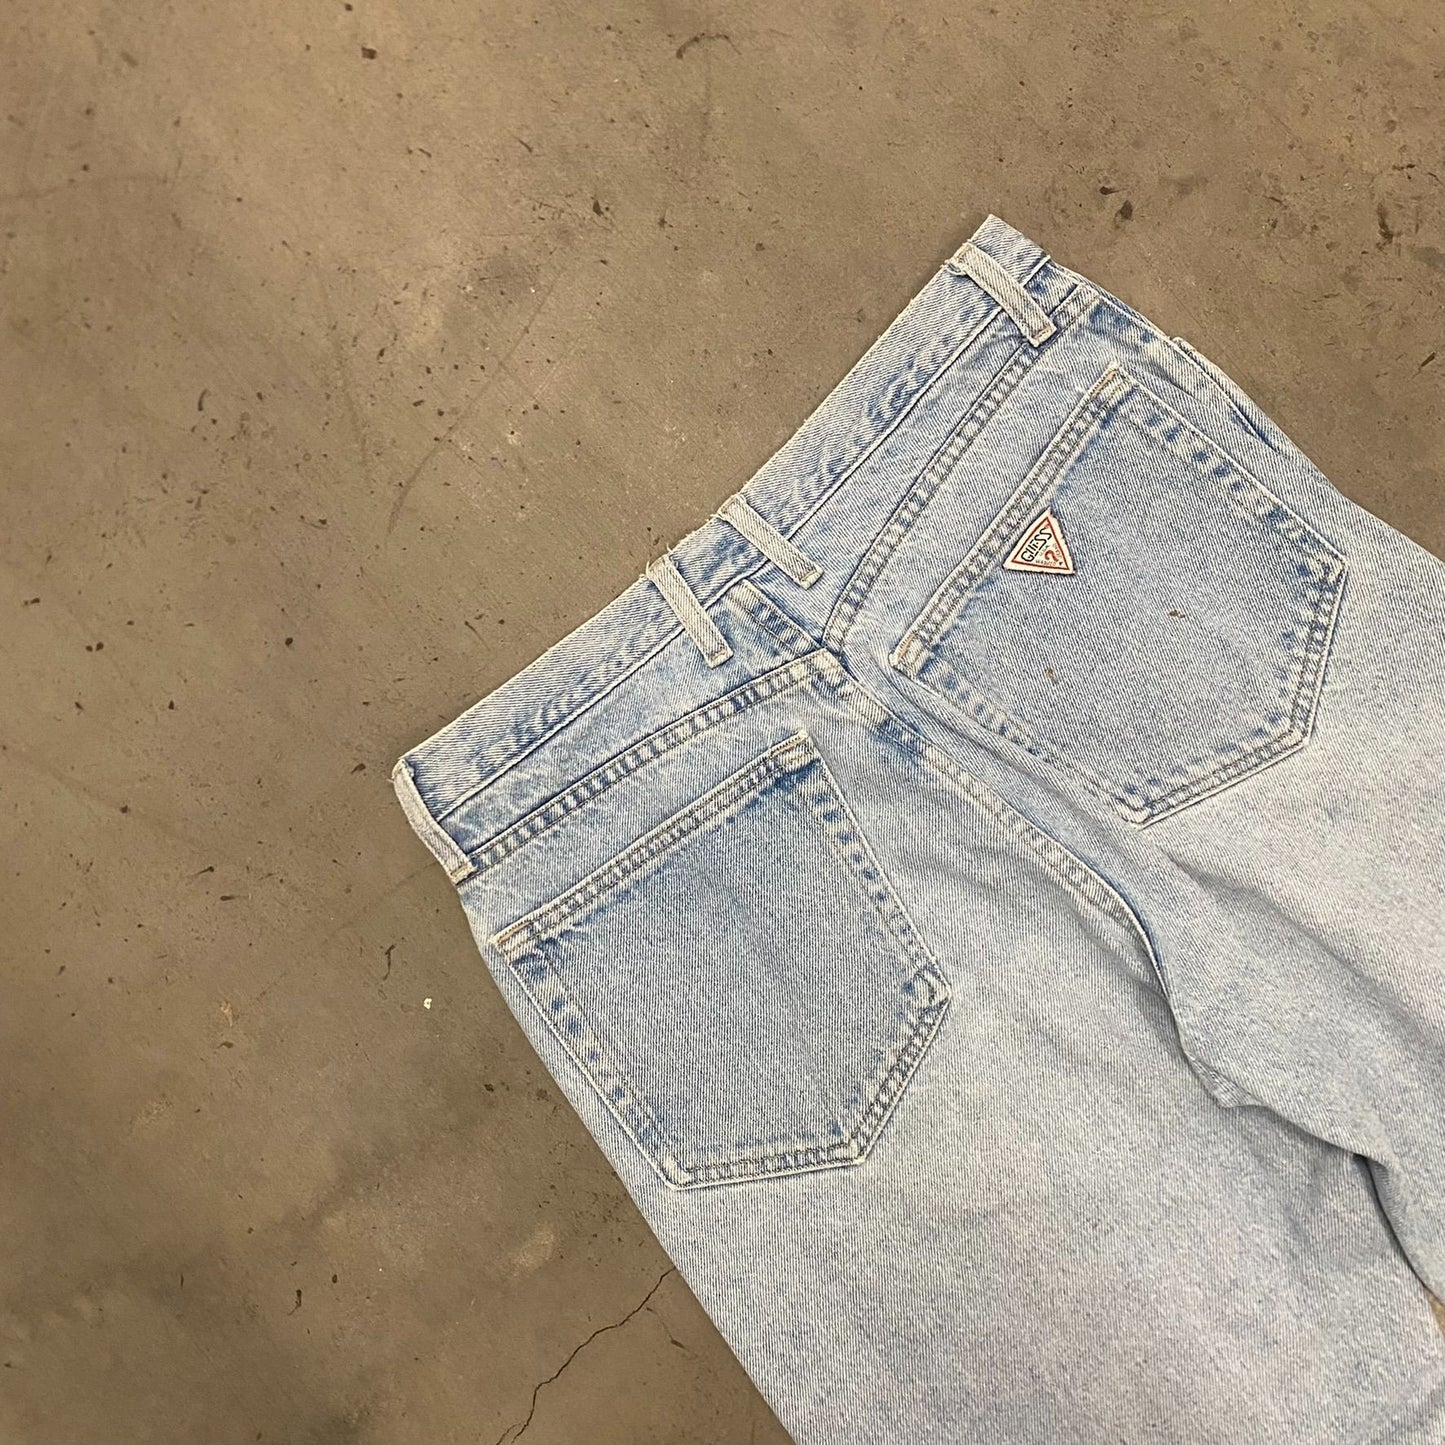 Vintage 90s Guess Stonewashed Faded Denim Baggy Jeans